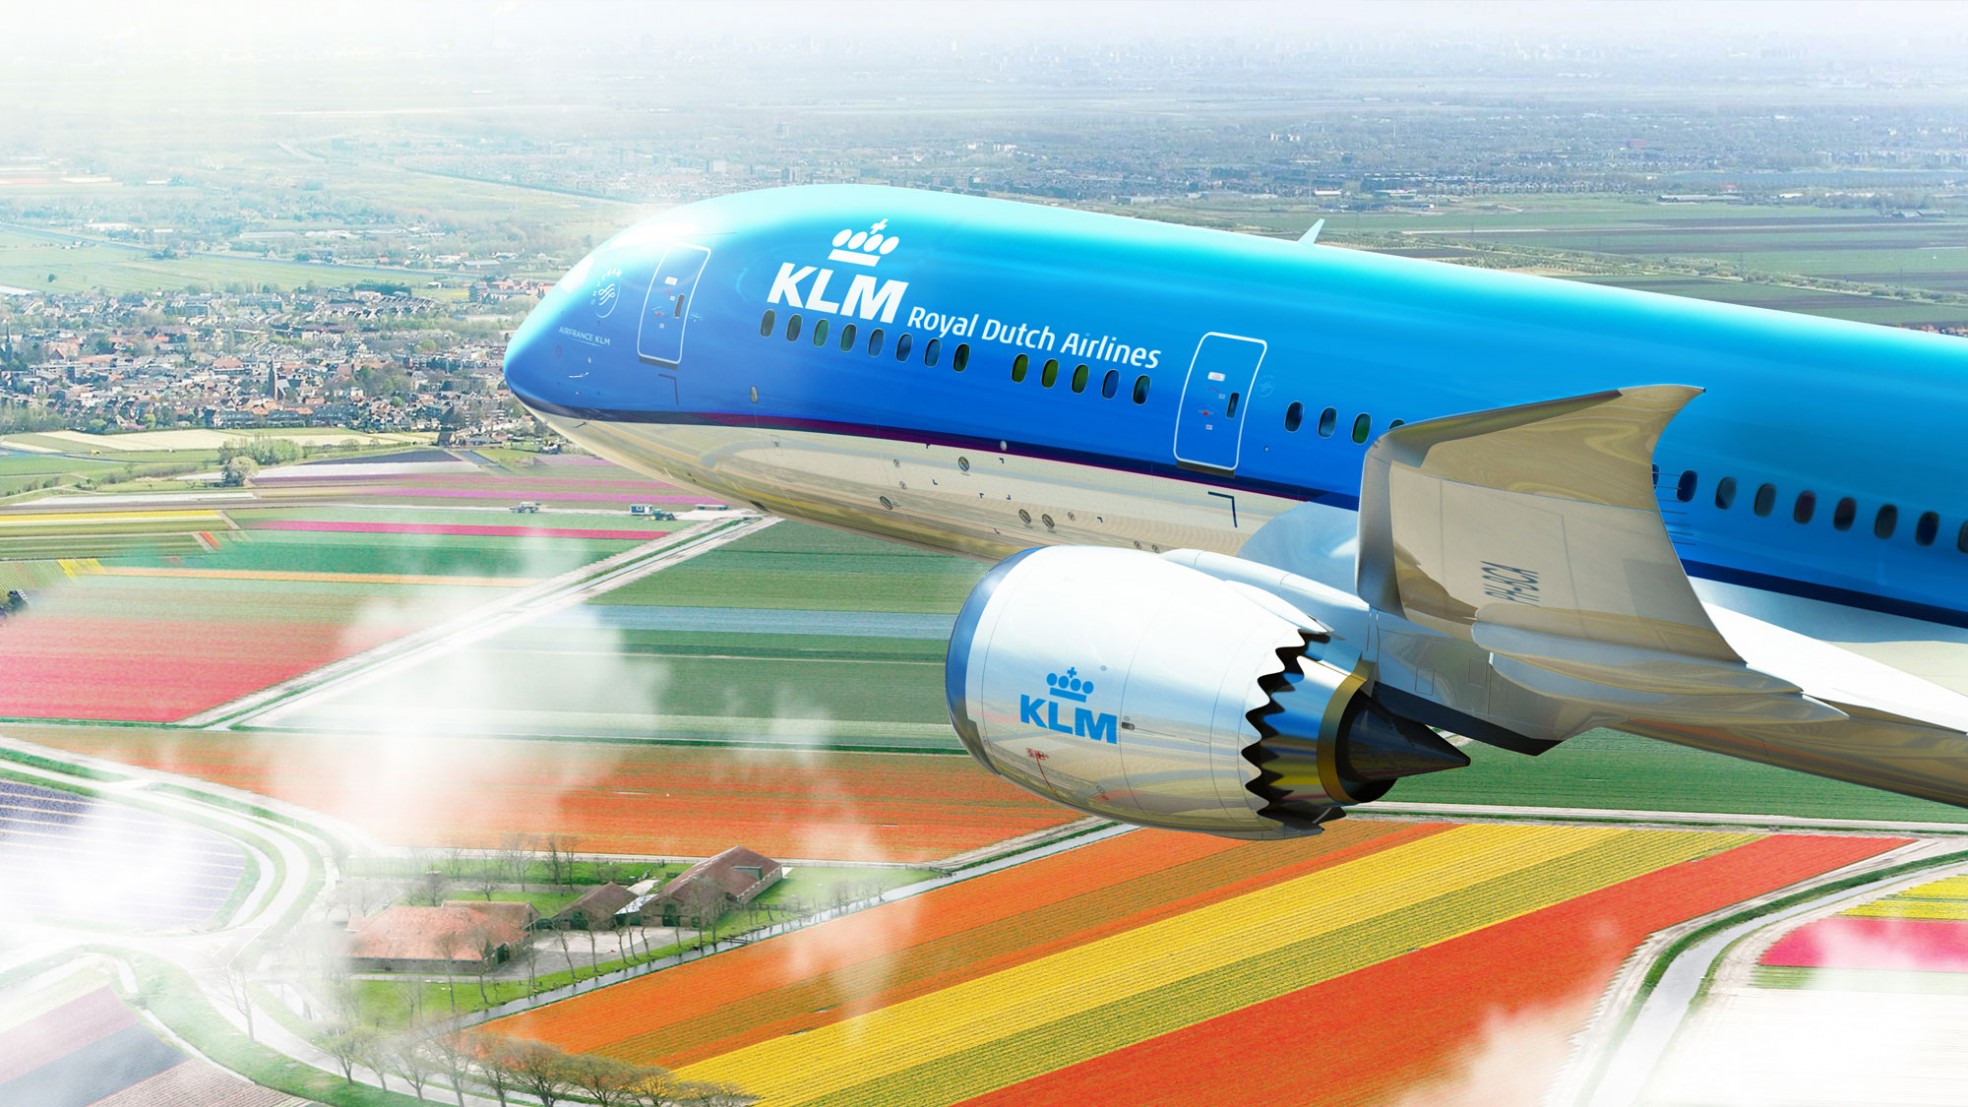 KLM Royal Dutch Airlines is certified as a 4Star Airline Skytrax